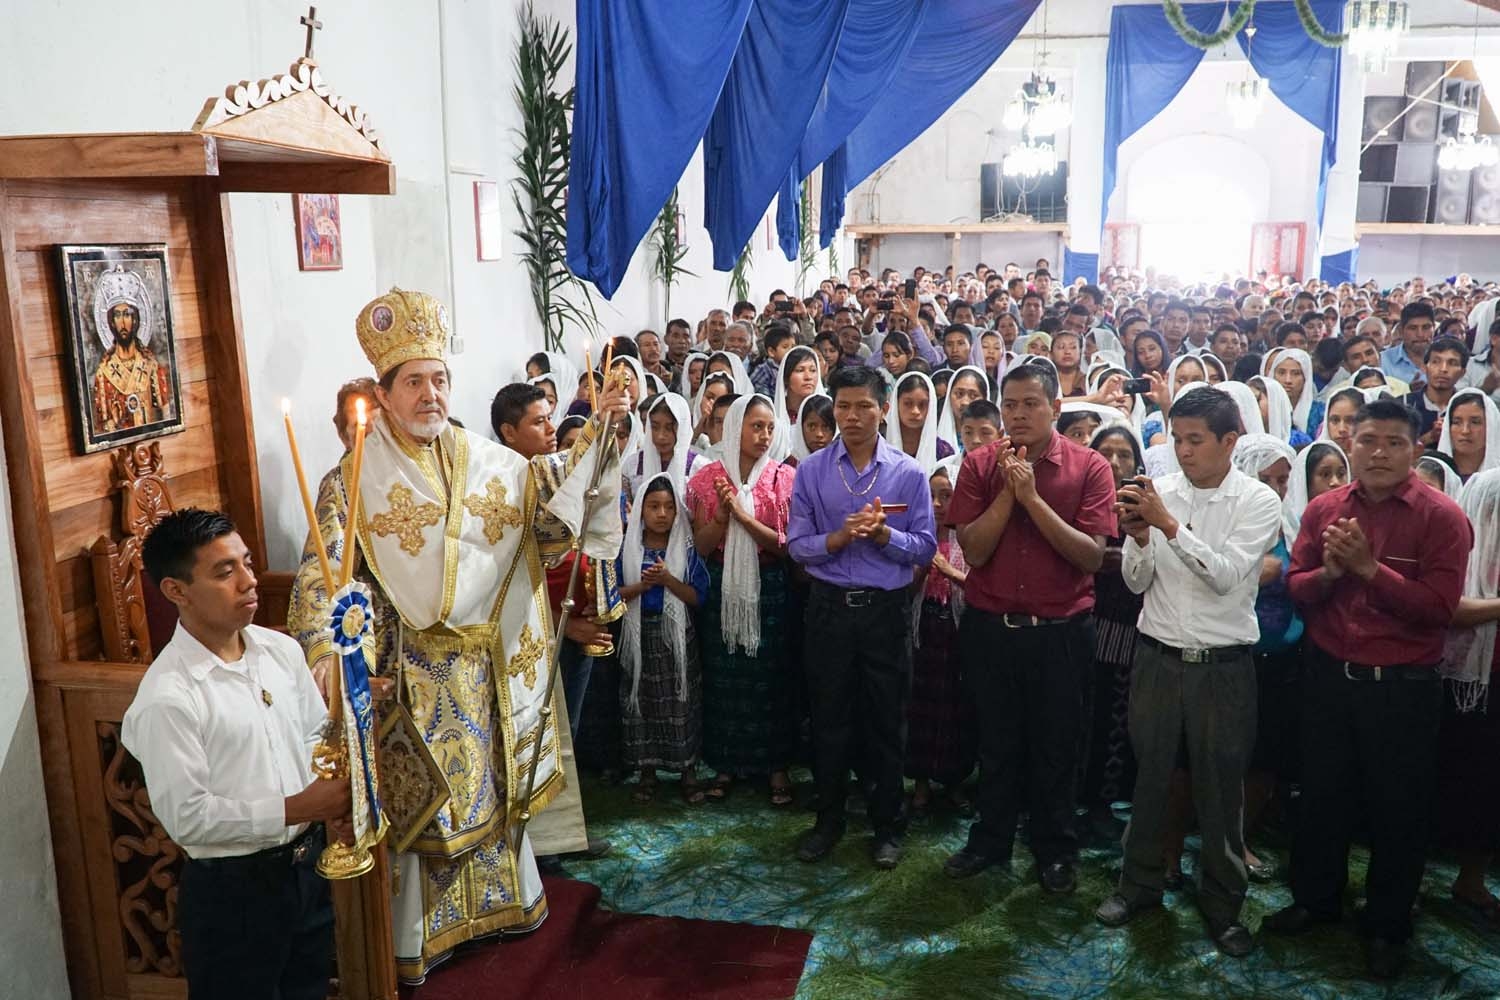 ARCHBISHOP BLESSES AGUACATE MAYAN ORTHODOX CLINIC AMIDST NATIONAL HEALTHCARE CRISIS